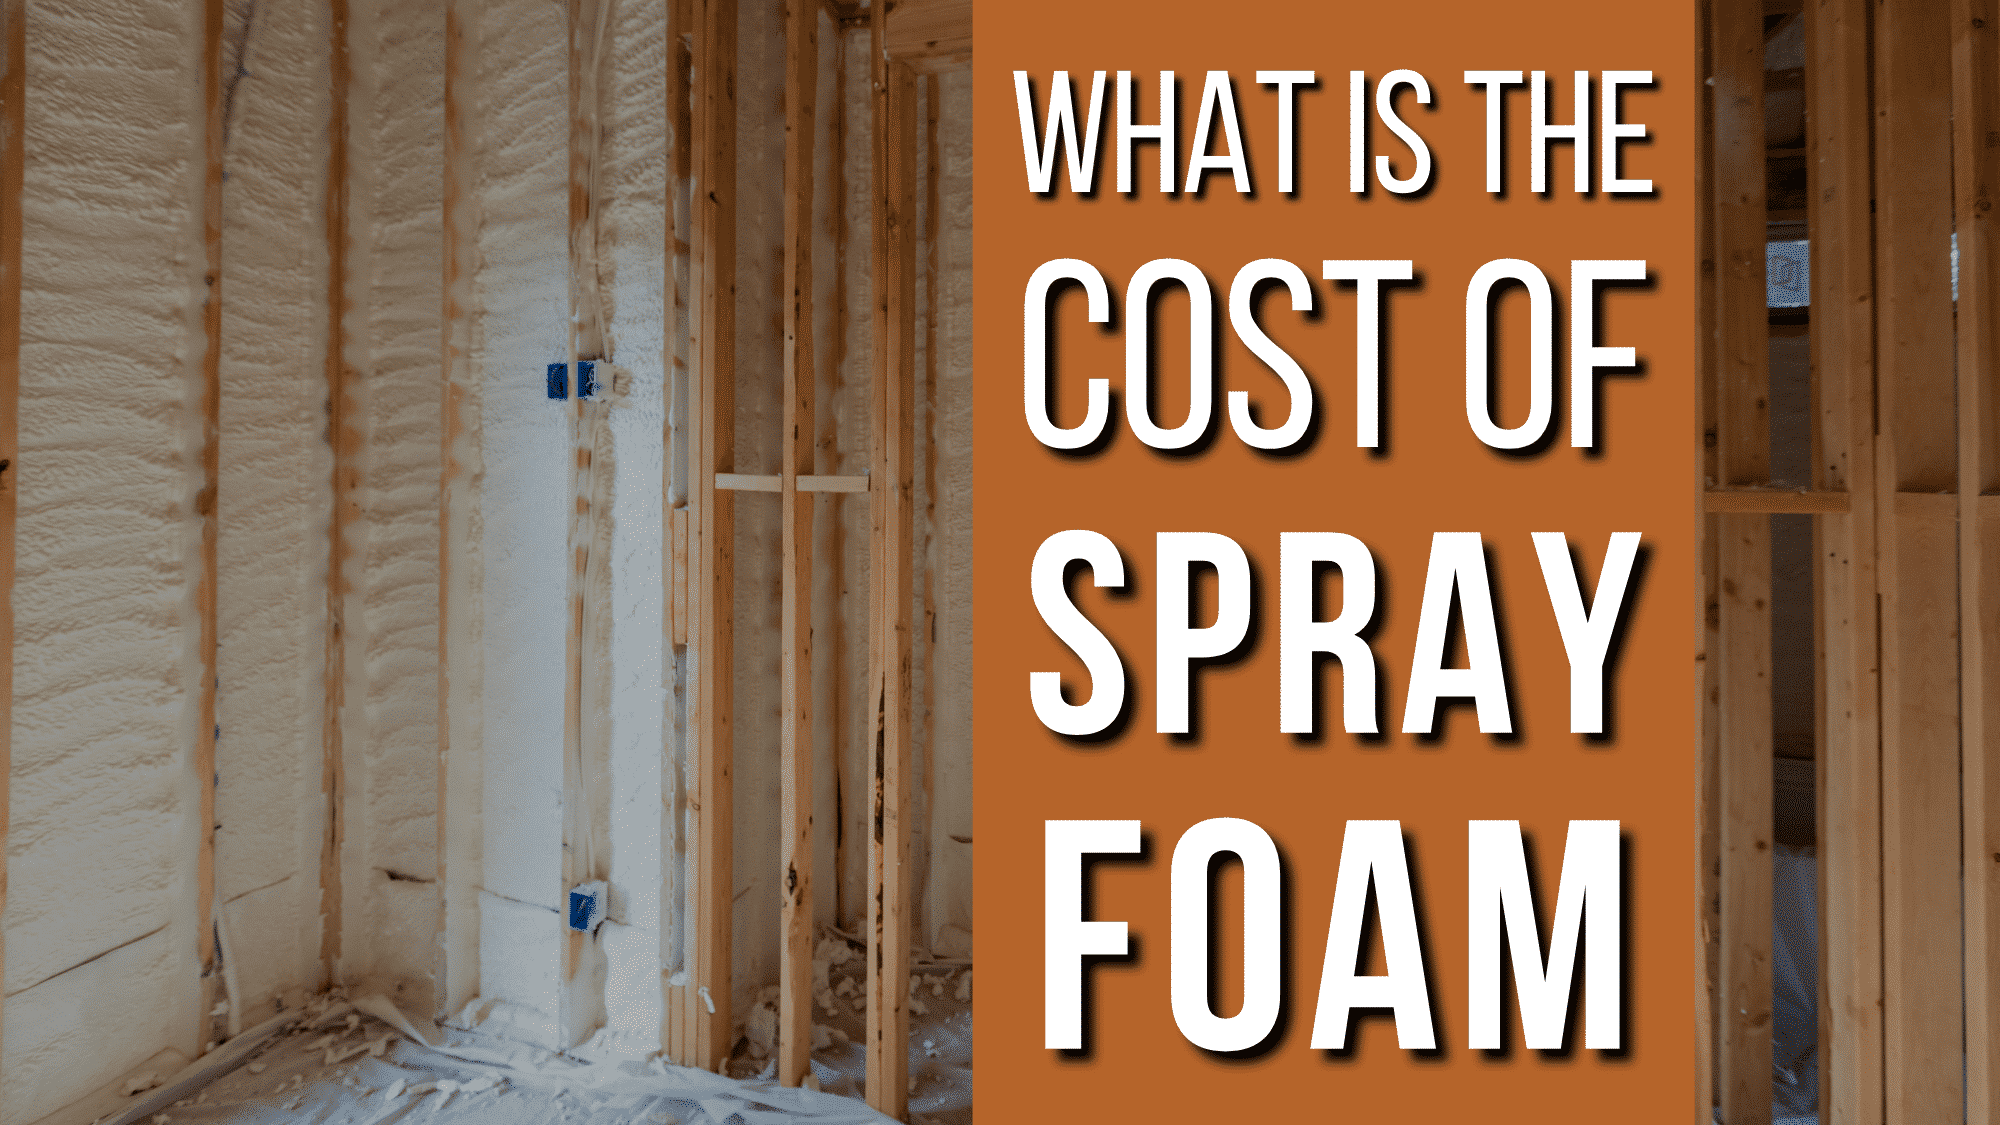 How much does spray foam insulation cost?